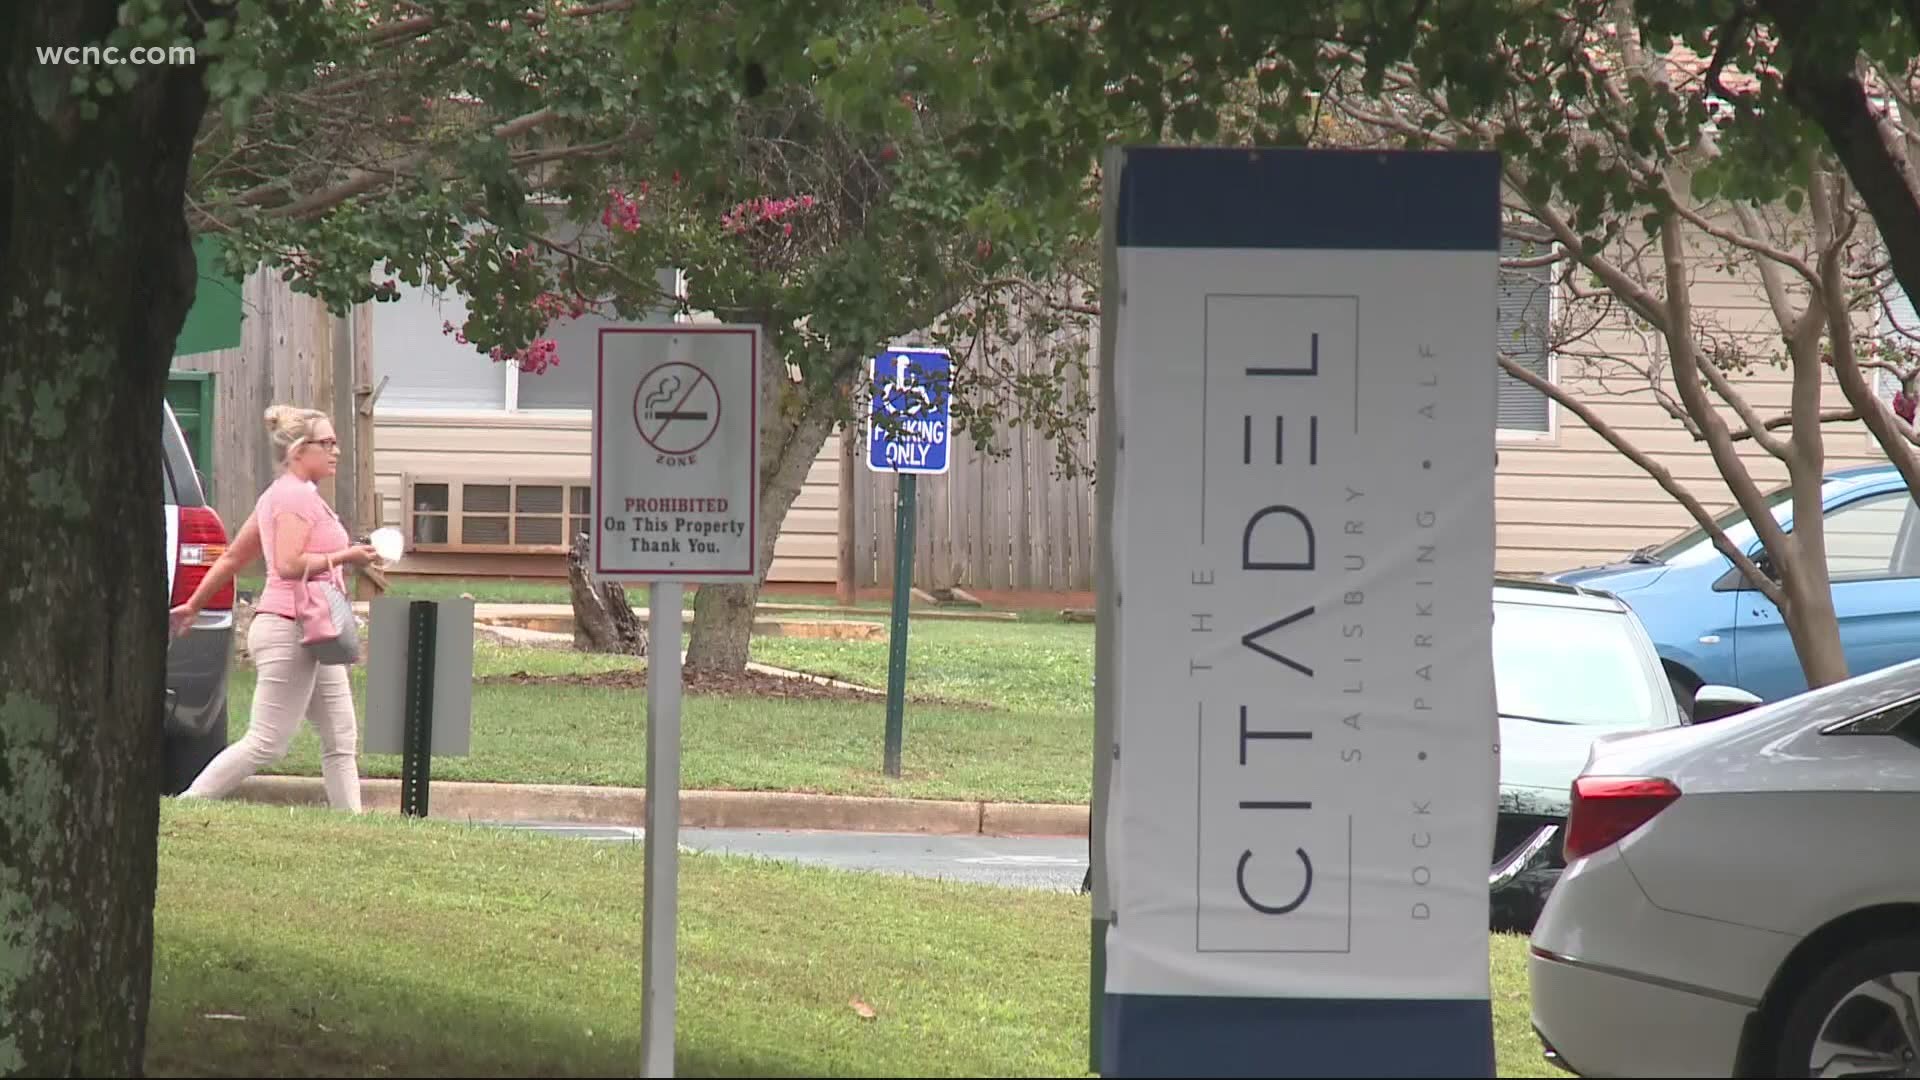 According to state data the Citadel Salisbury had more than 150 COVID-19 cases and at least 18 deaths in May.